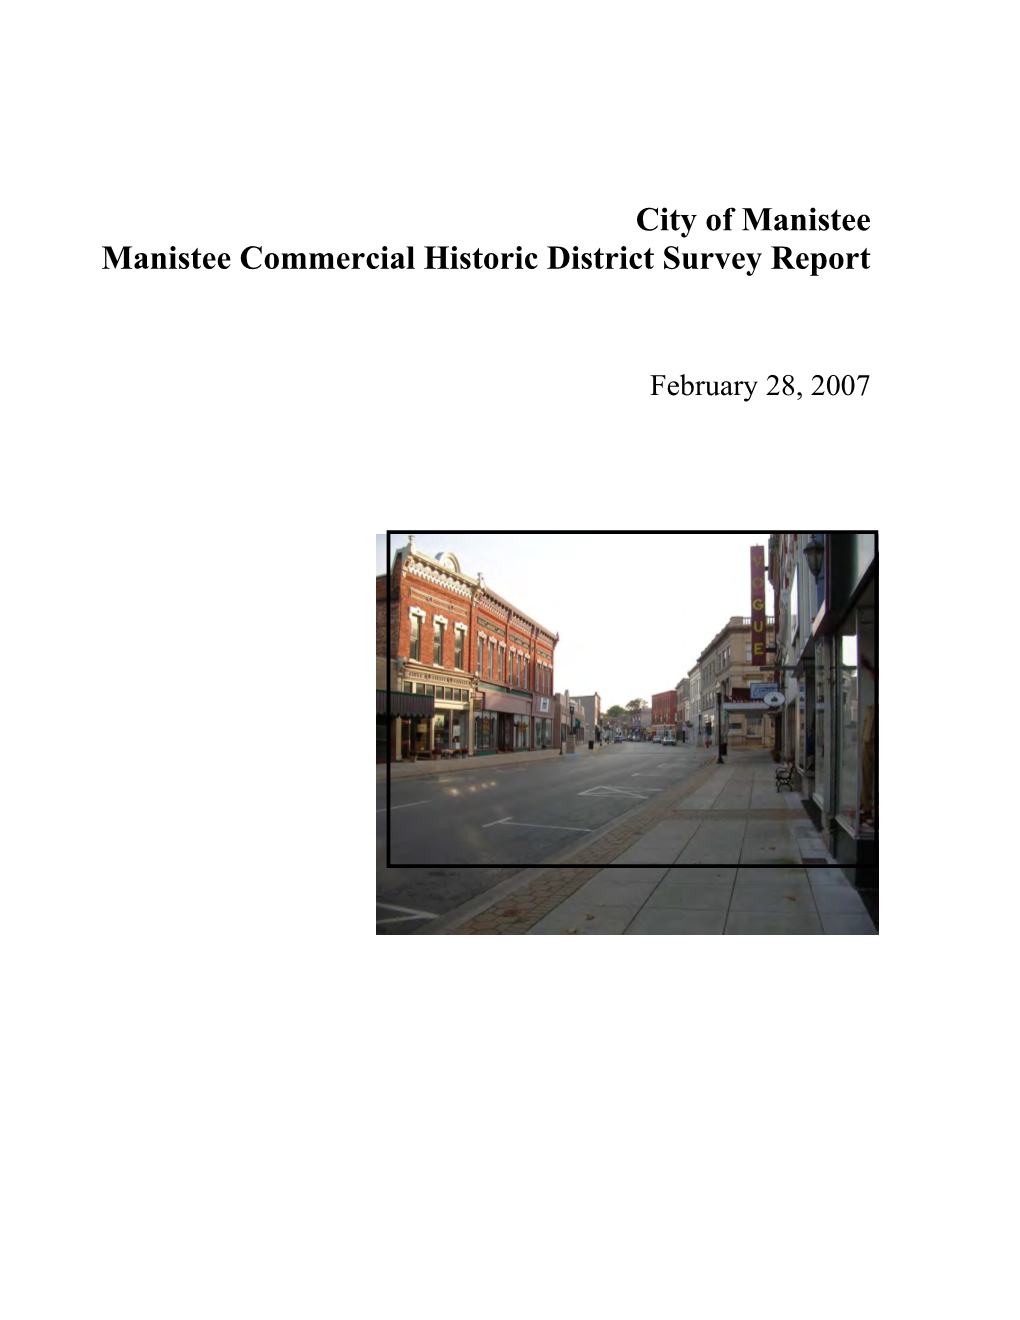 Manistee Commercial Historic District Survey Report